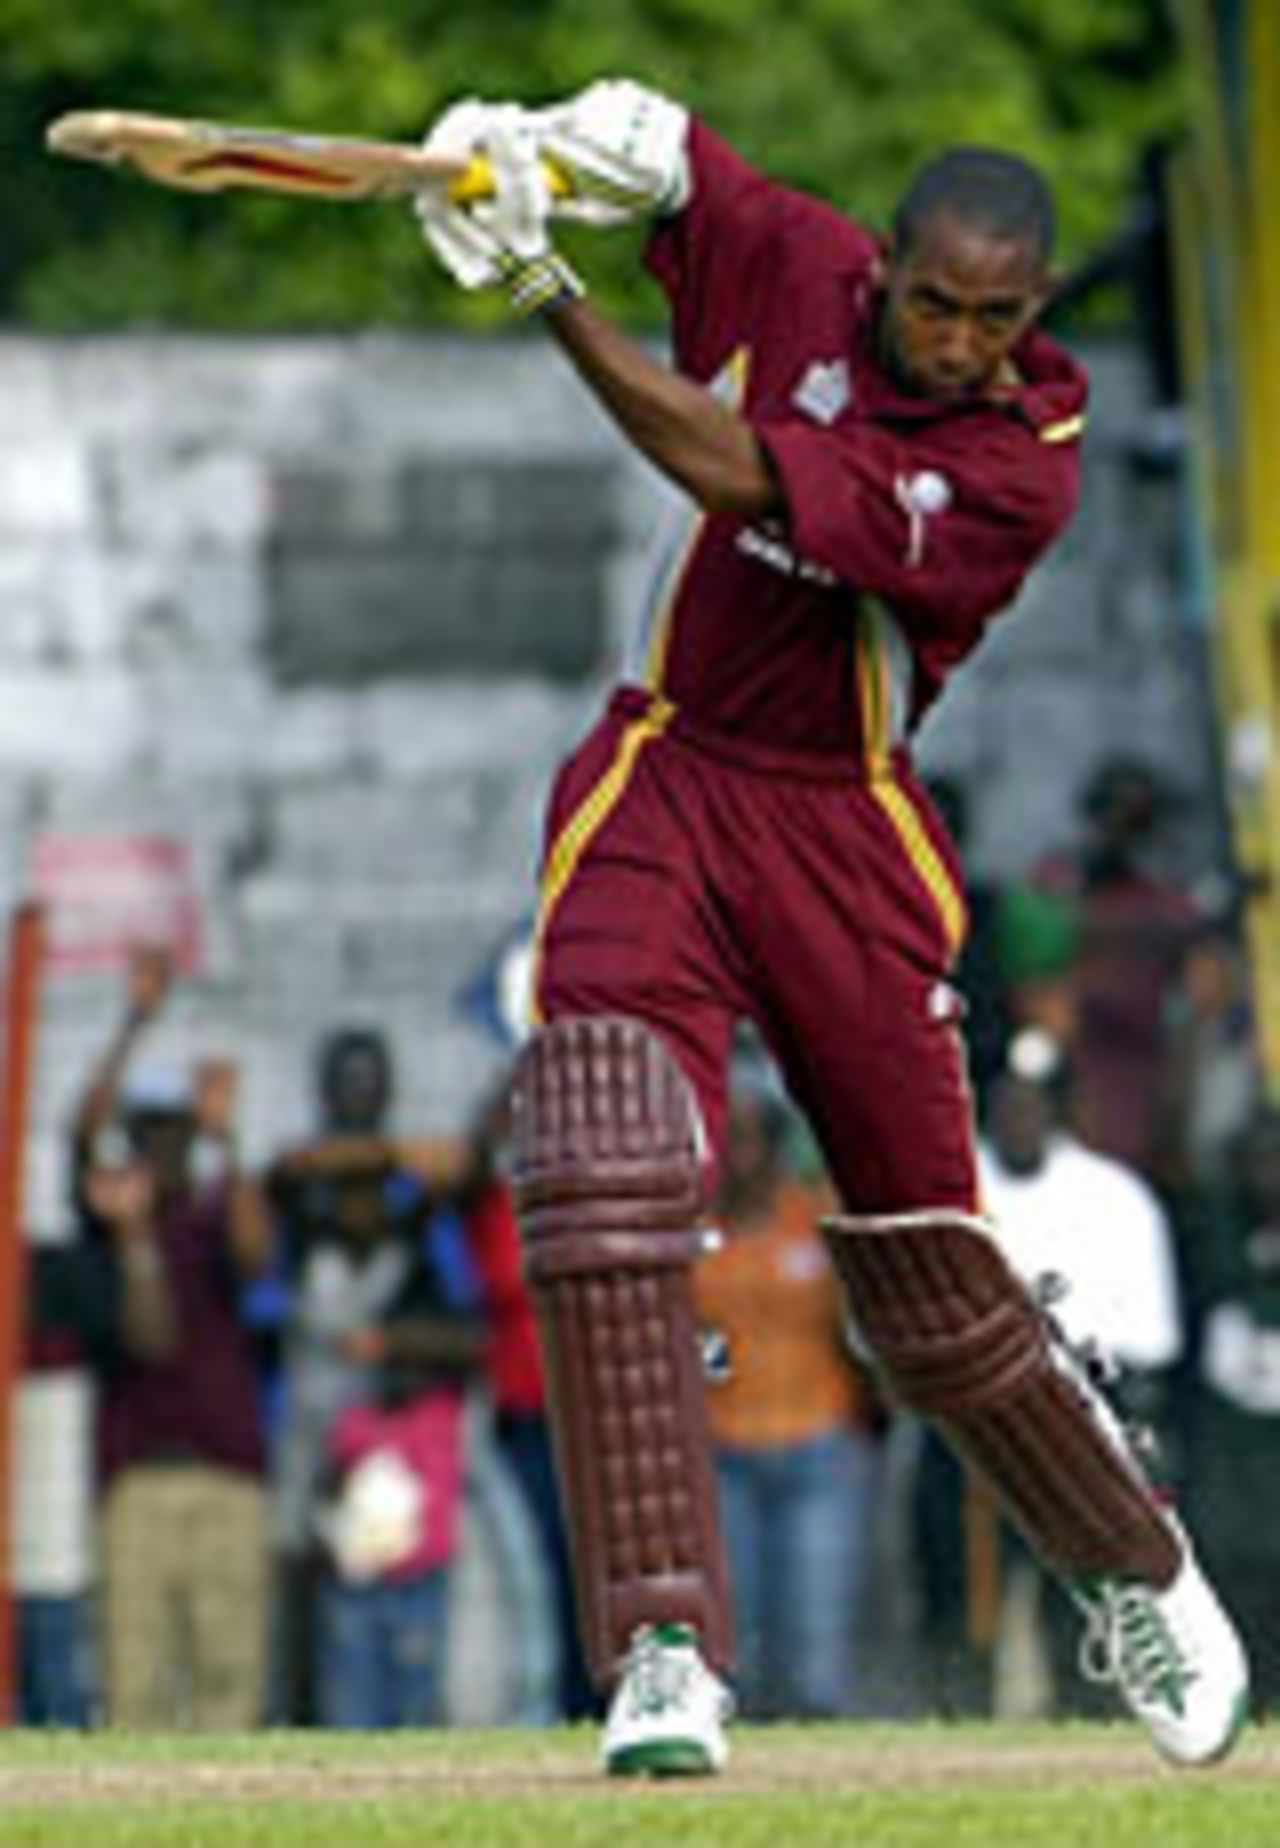 Ian Bradshaw batting on his way to the Man of the Match award, West Indies v Bangladesh, 1st ODI, St Vincent, May 15, 2004